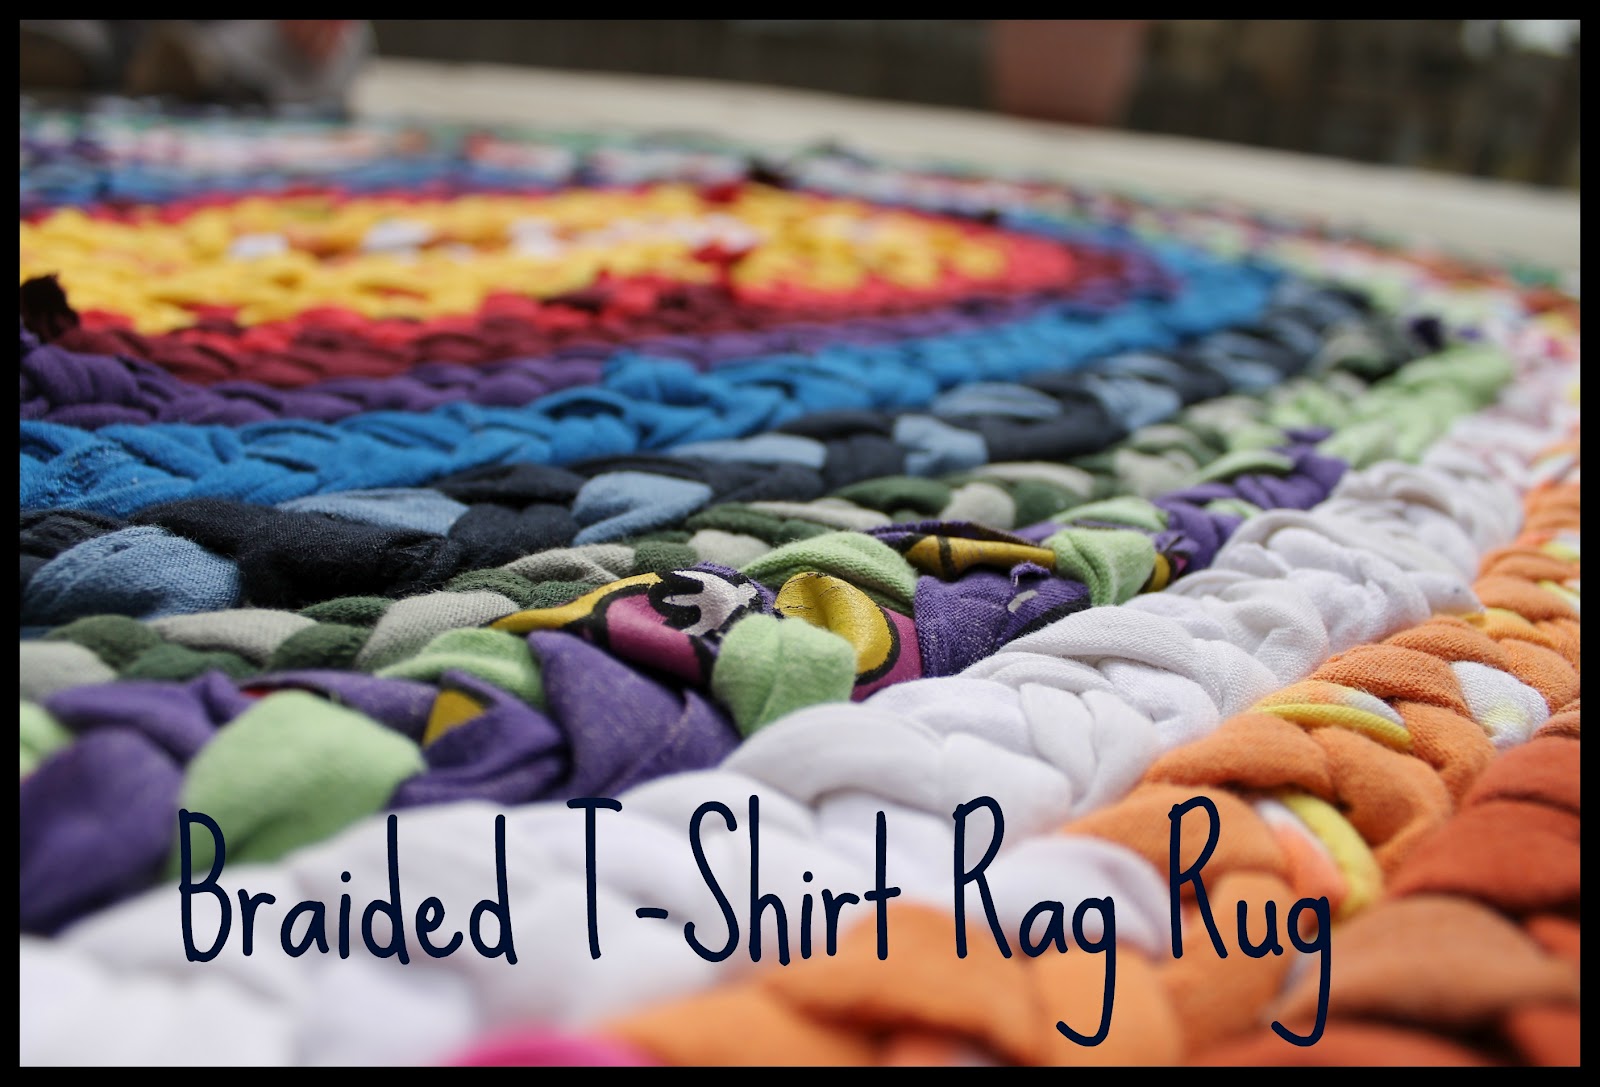 Friday Project: Braided T-Shirt Rag Rug - Catholic Sprouts